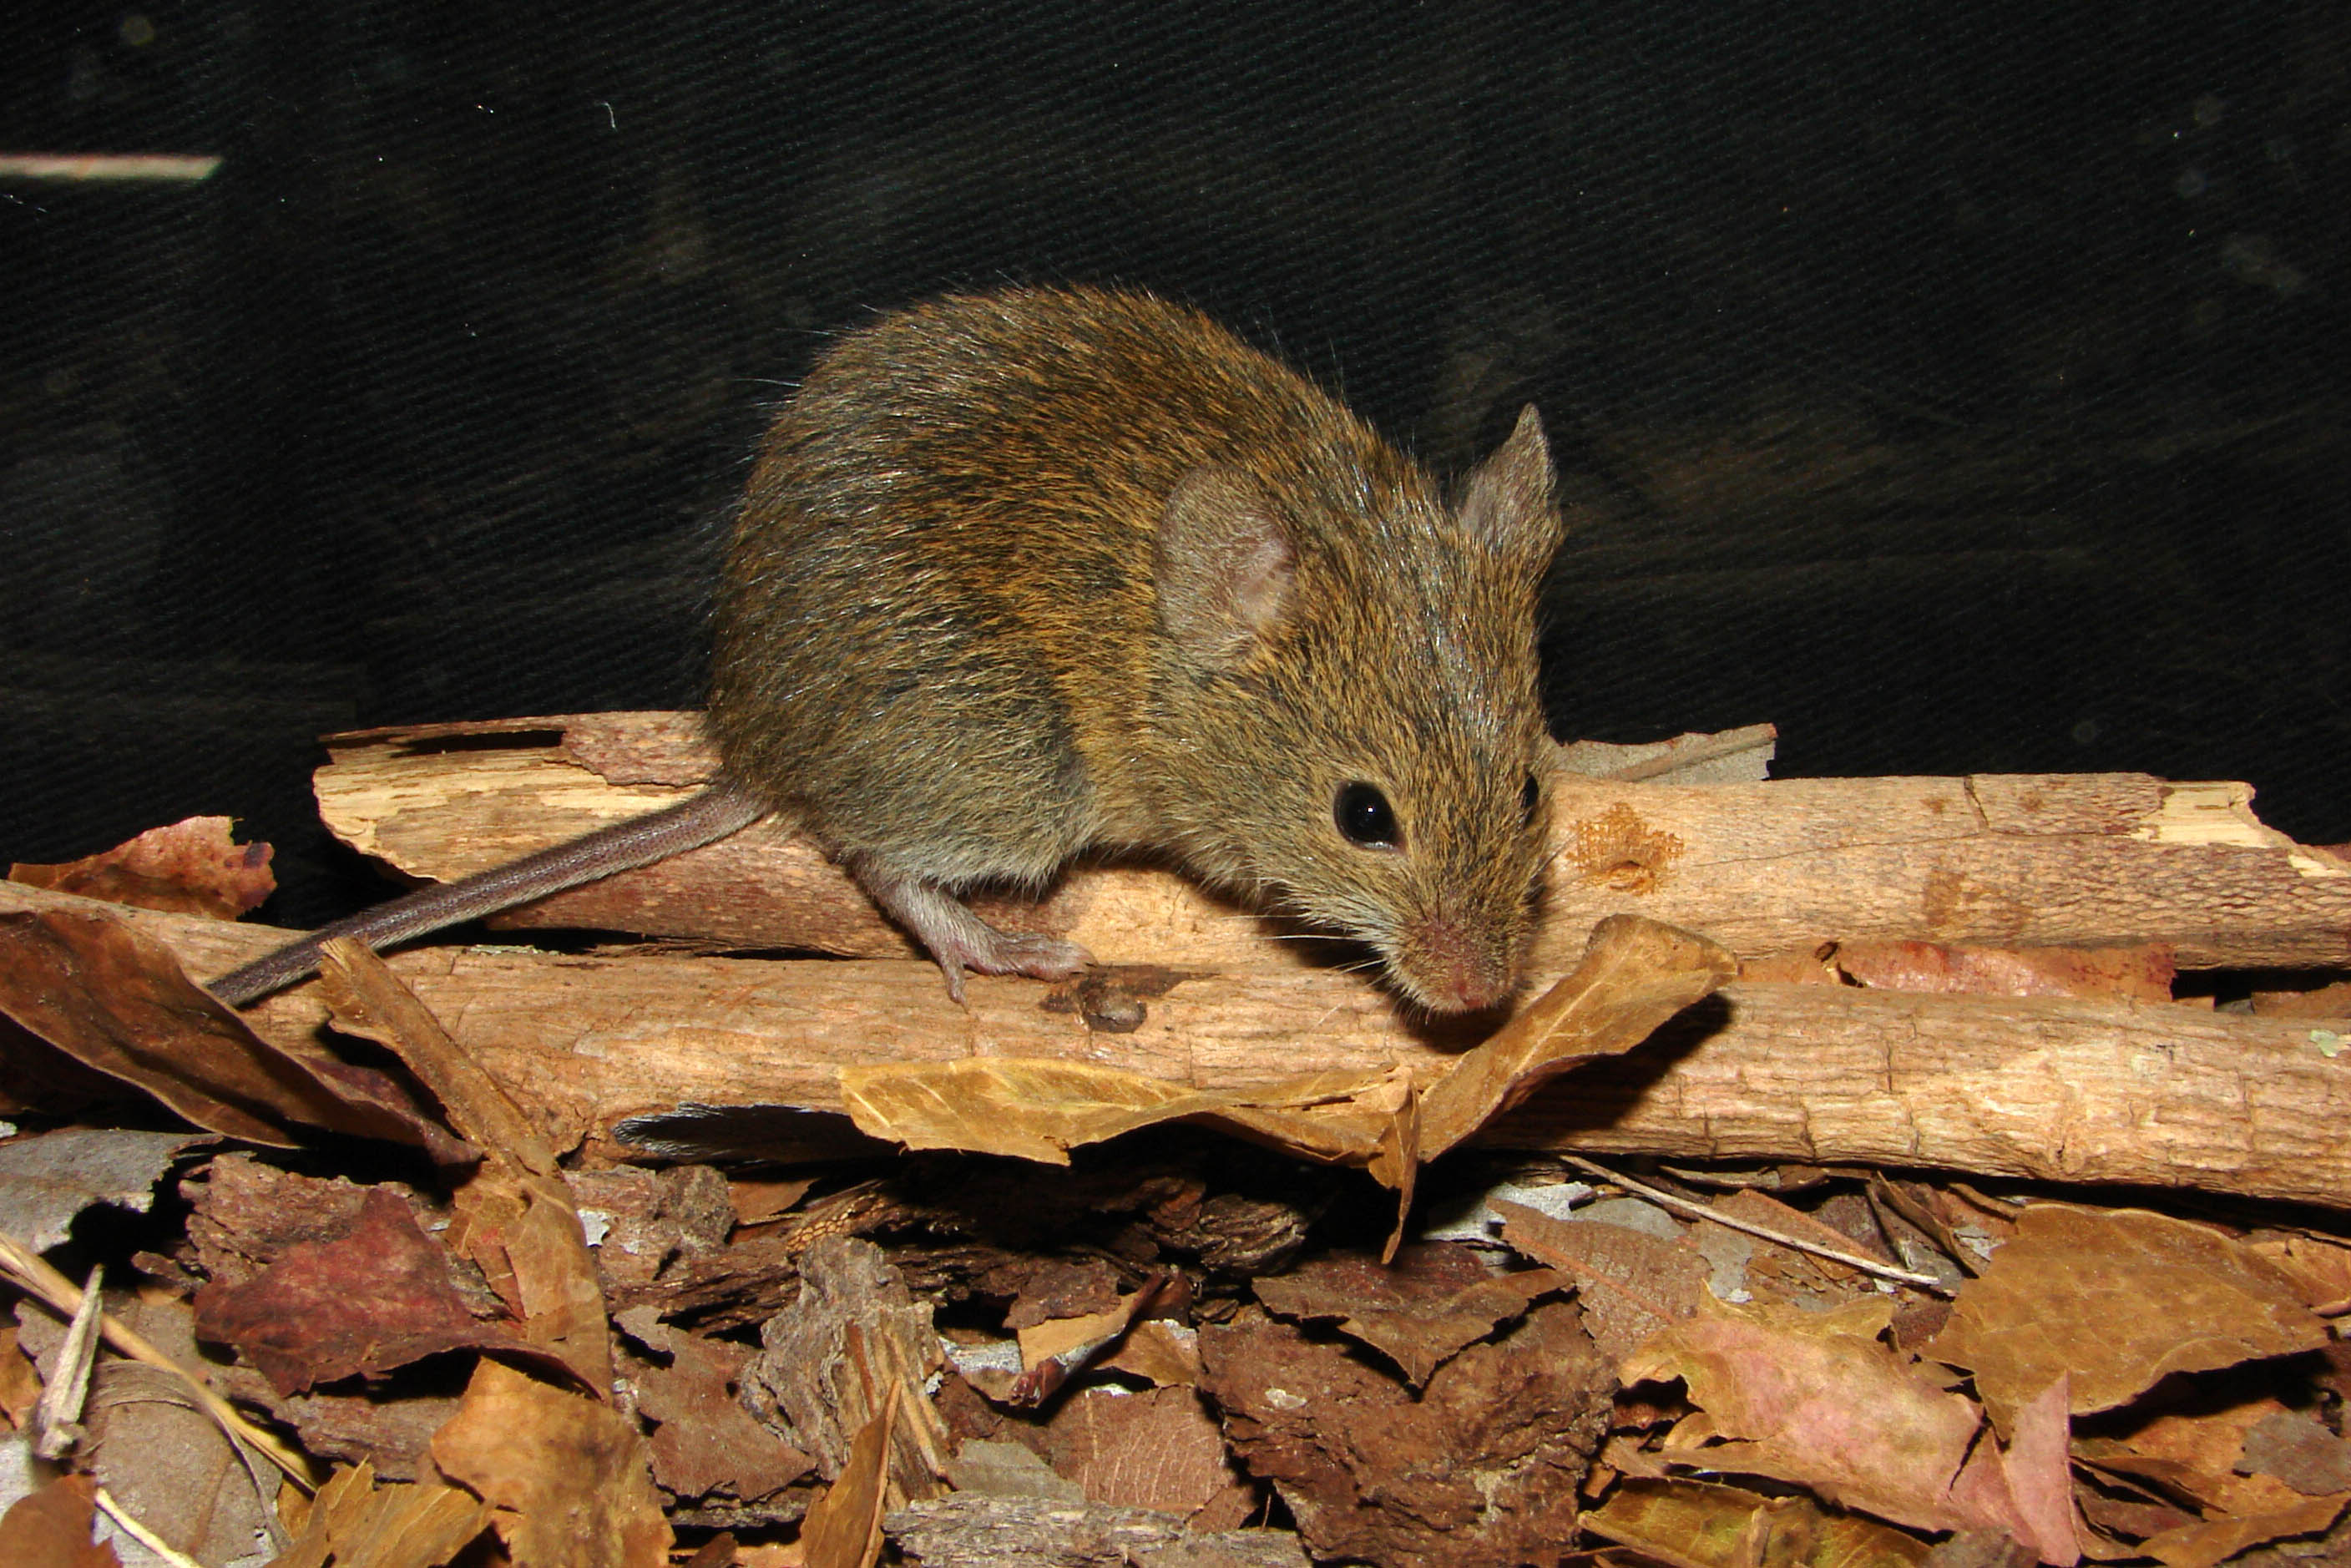 A mouse perched on sticks surrounded by dried brown leaves.